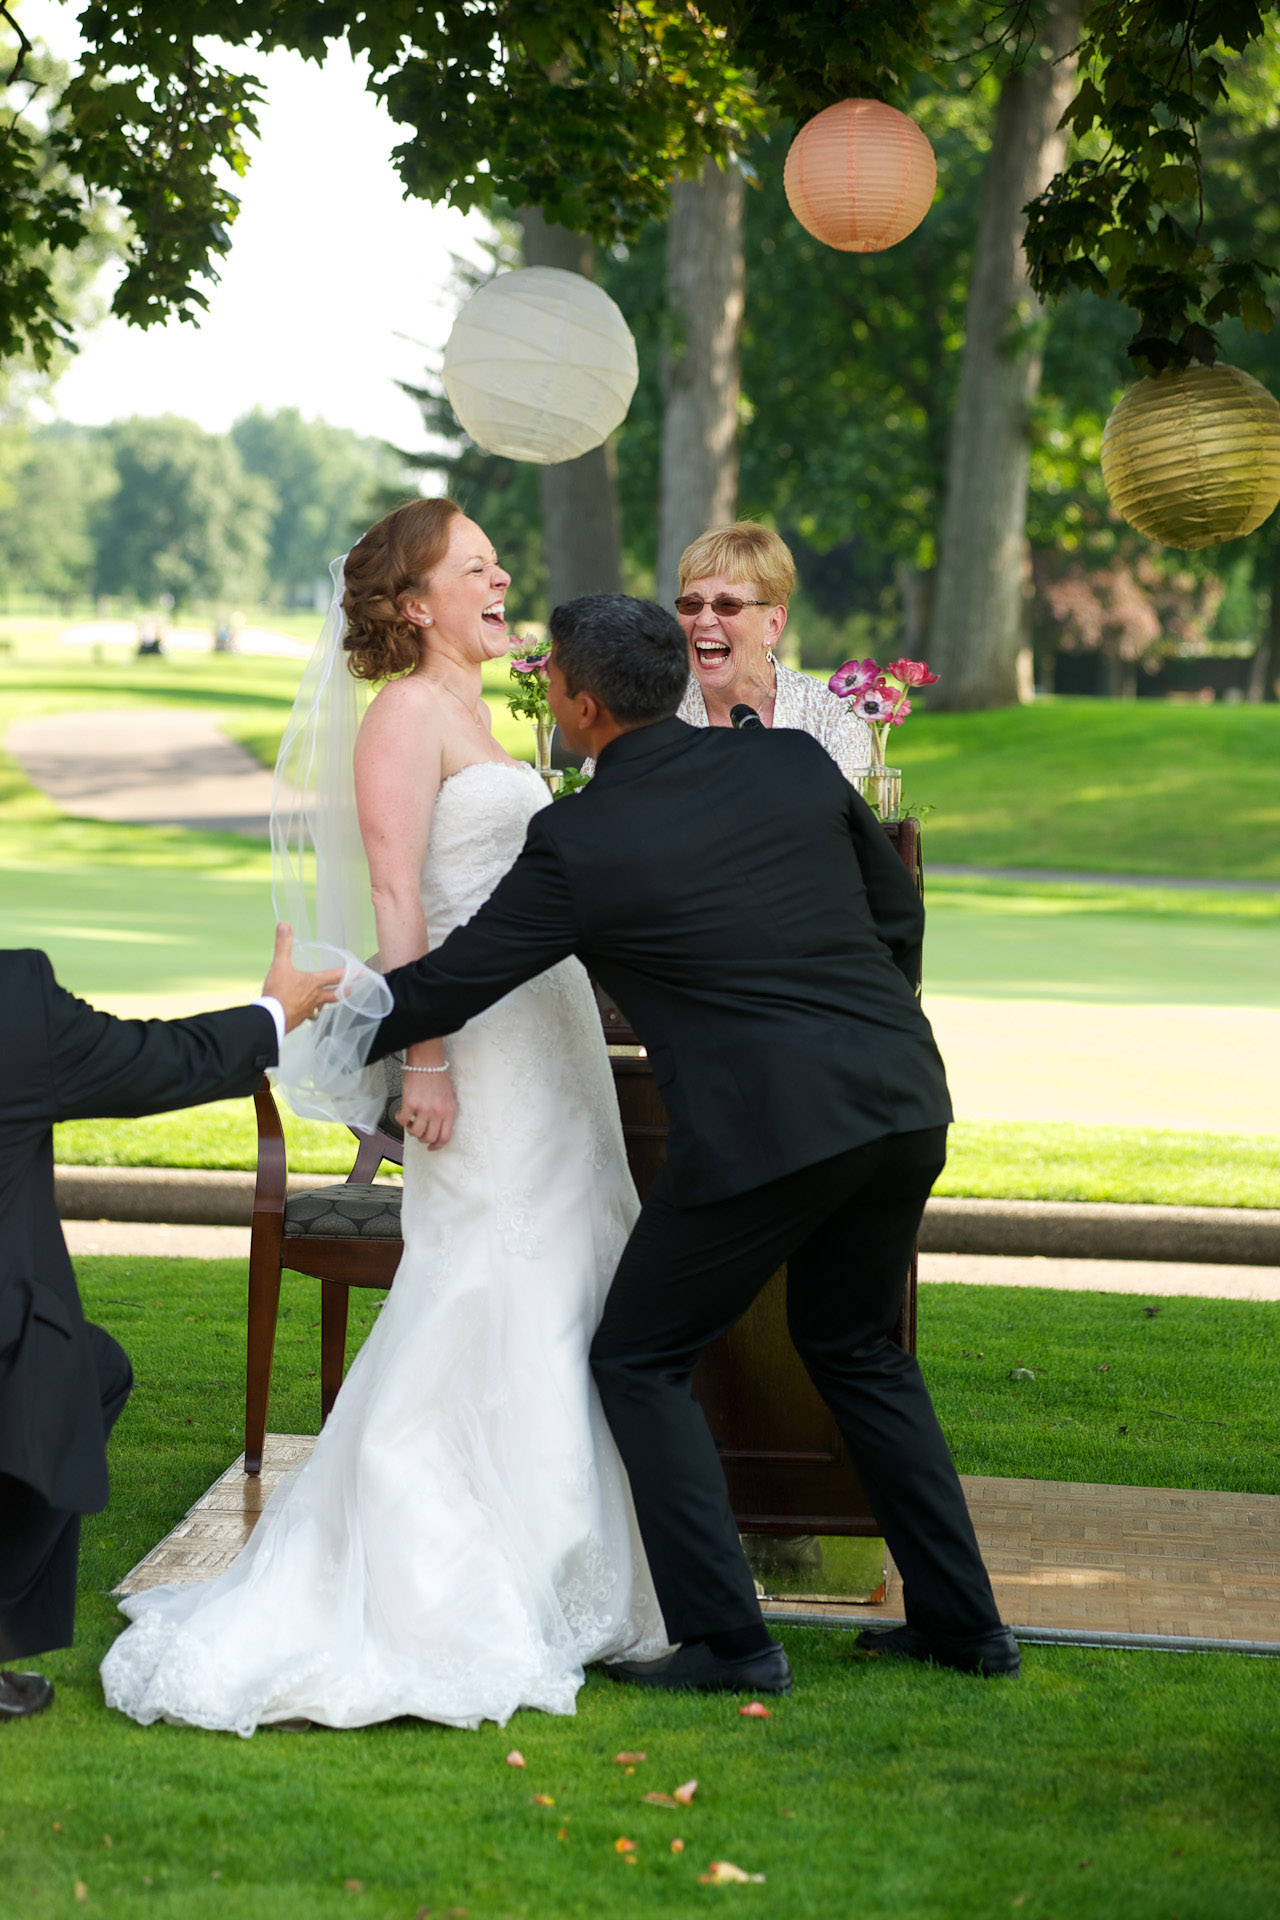 Detroit Golf Club wedding photographer's photo of the bride and groom still battling her veil at the Detroit Golf Club.